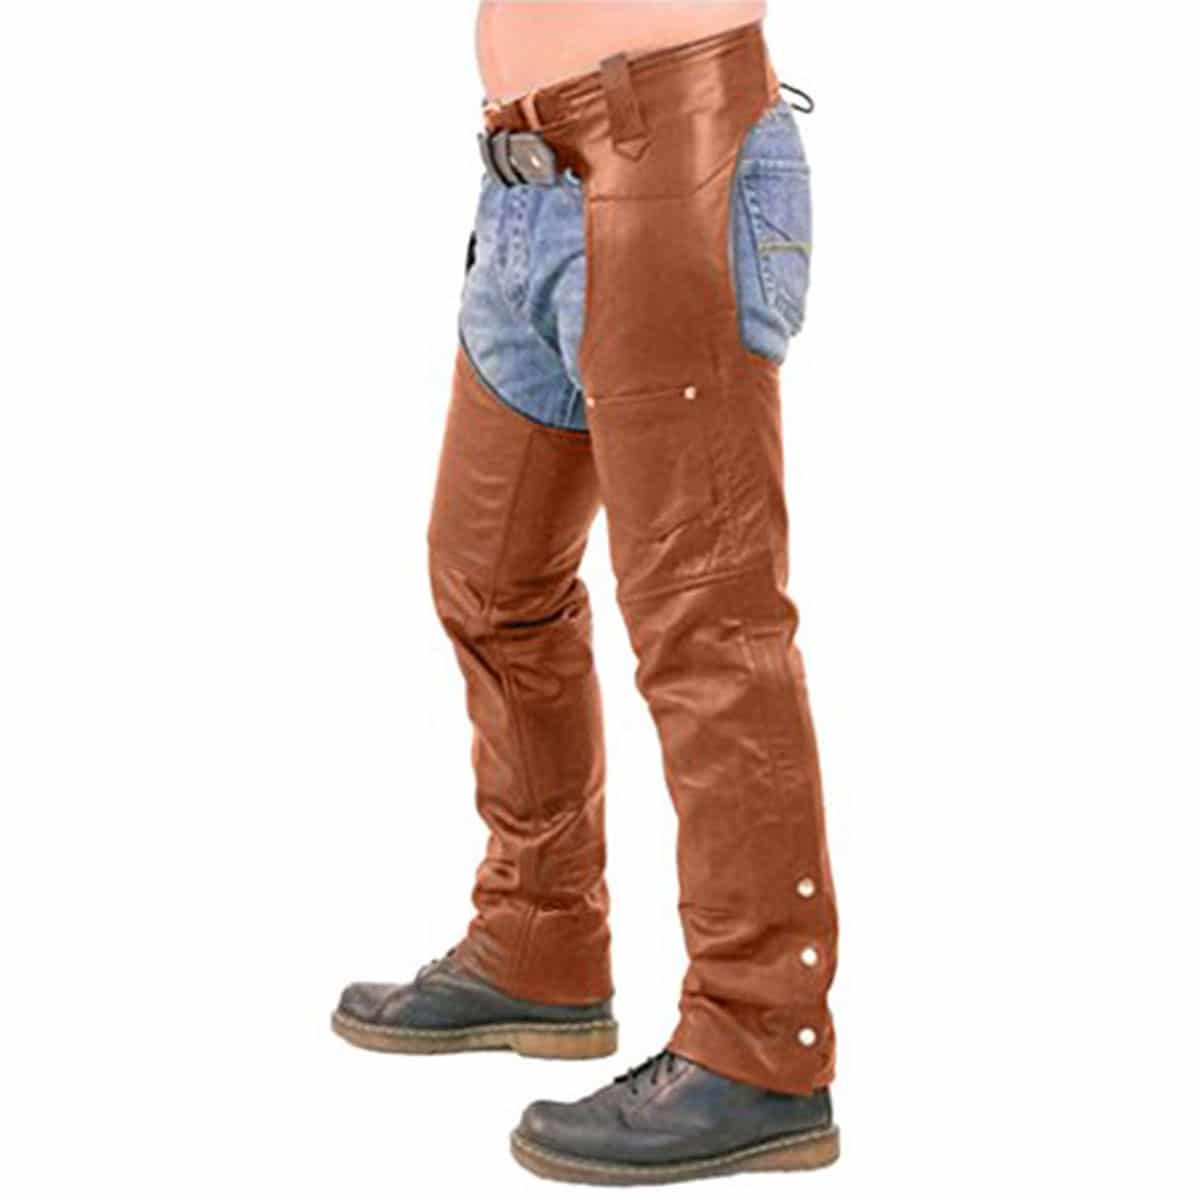 Mens Bikers Chaps Jeans Brown Leather Motorcycle Style Trouser Pants - (CHAPS-BRW)